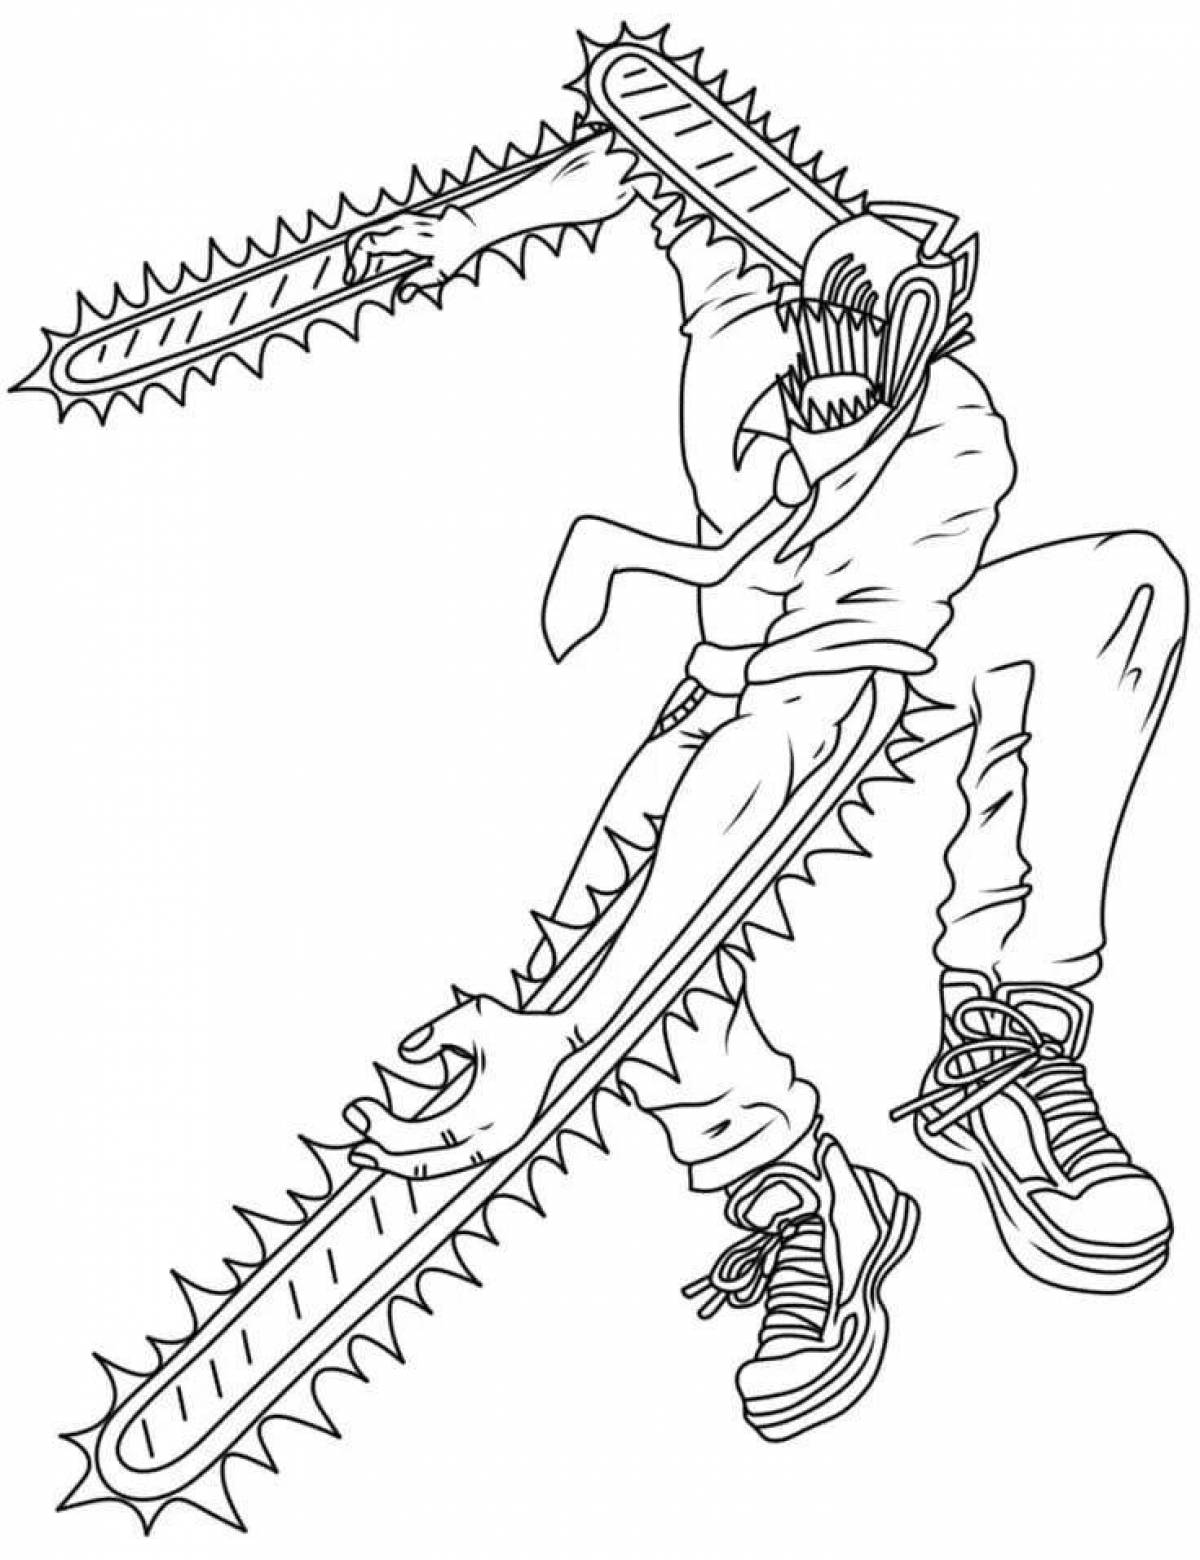 Power man chainsaw coloring page live